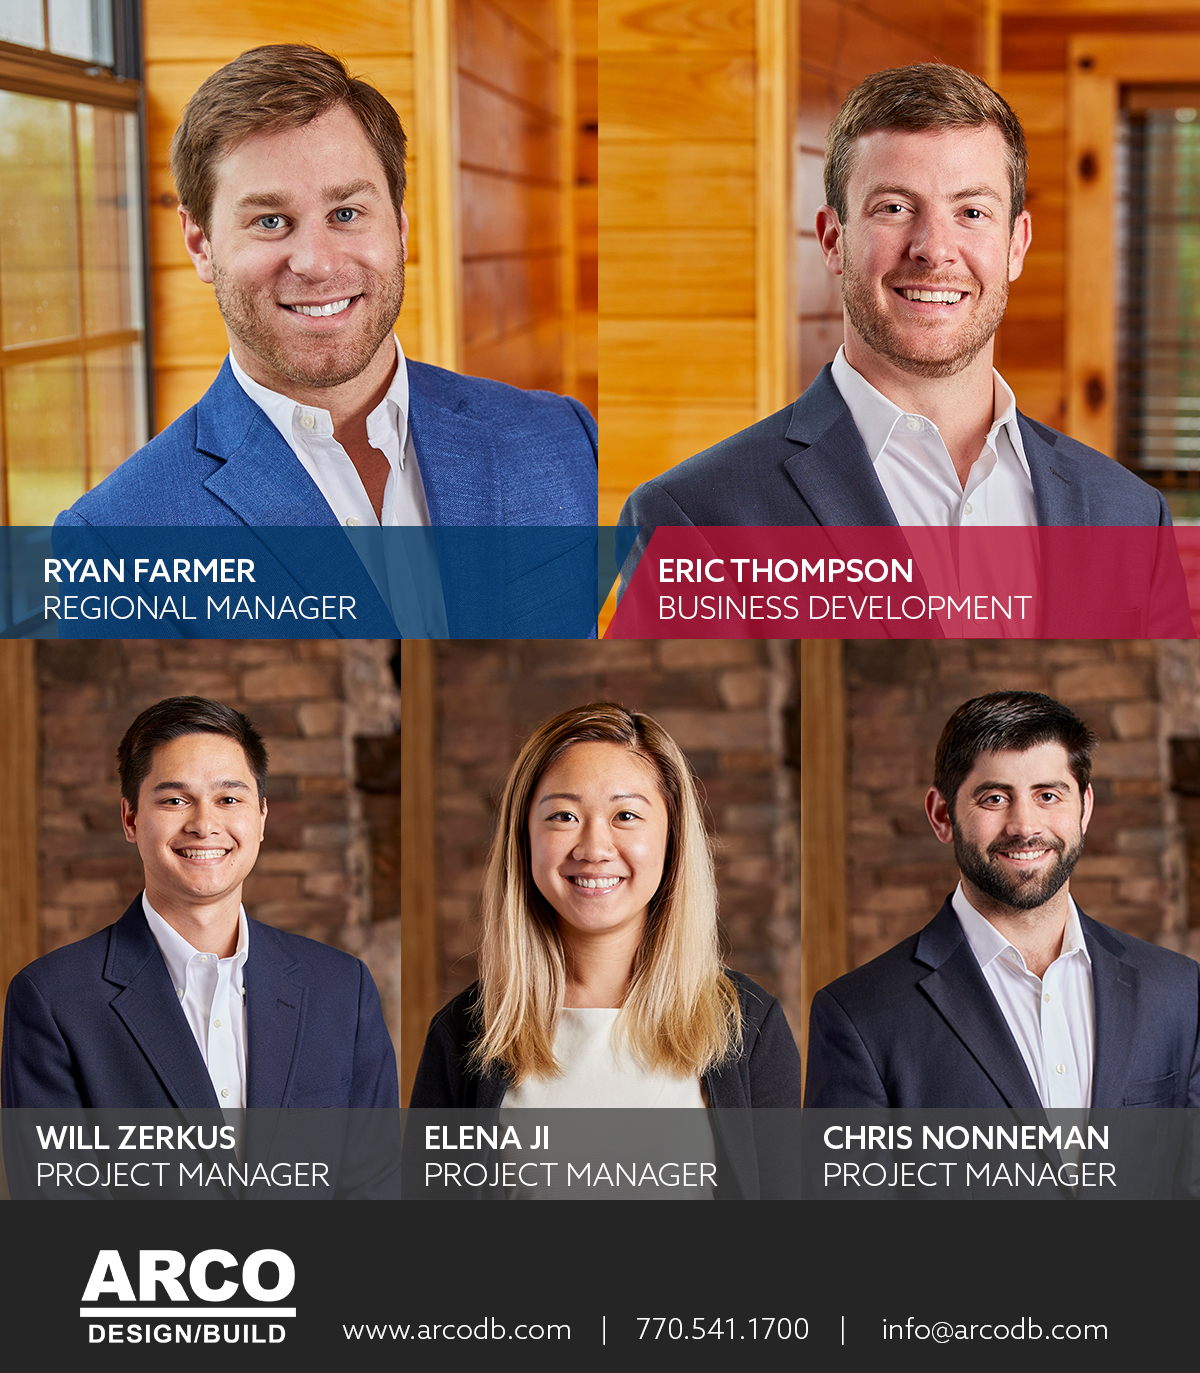 ARCO Design/Build's Charlotte Office is Staffed by Industry Leading Professionals